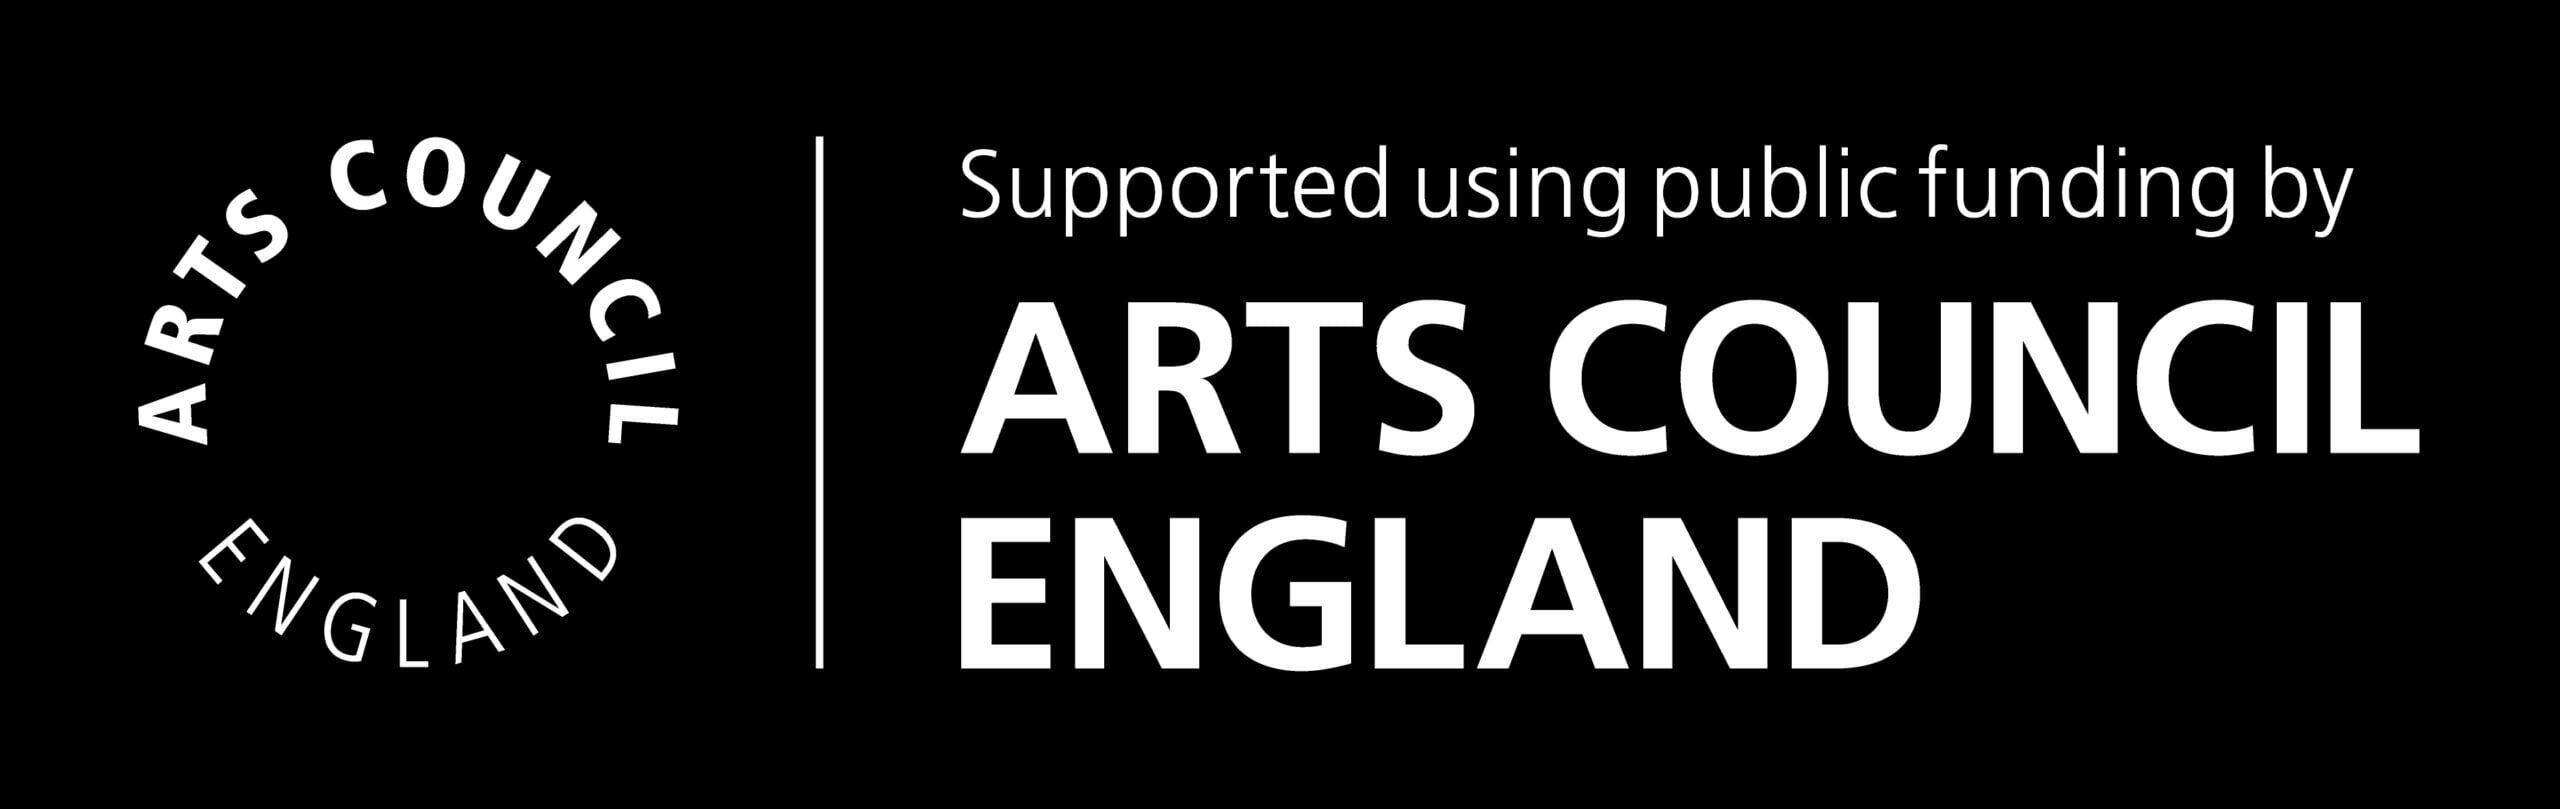 Supported using Arts Council England logo